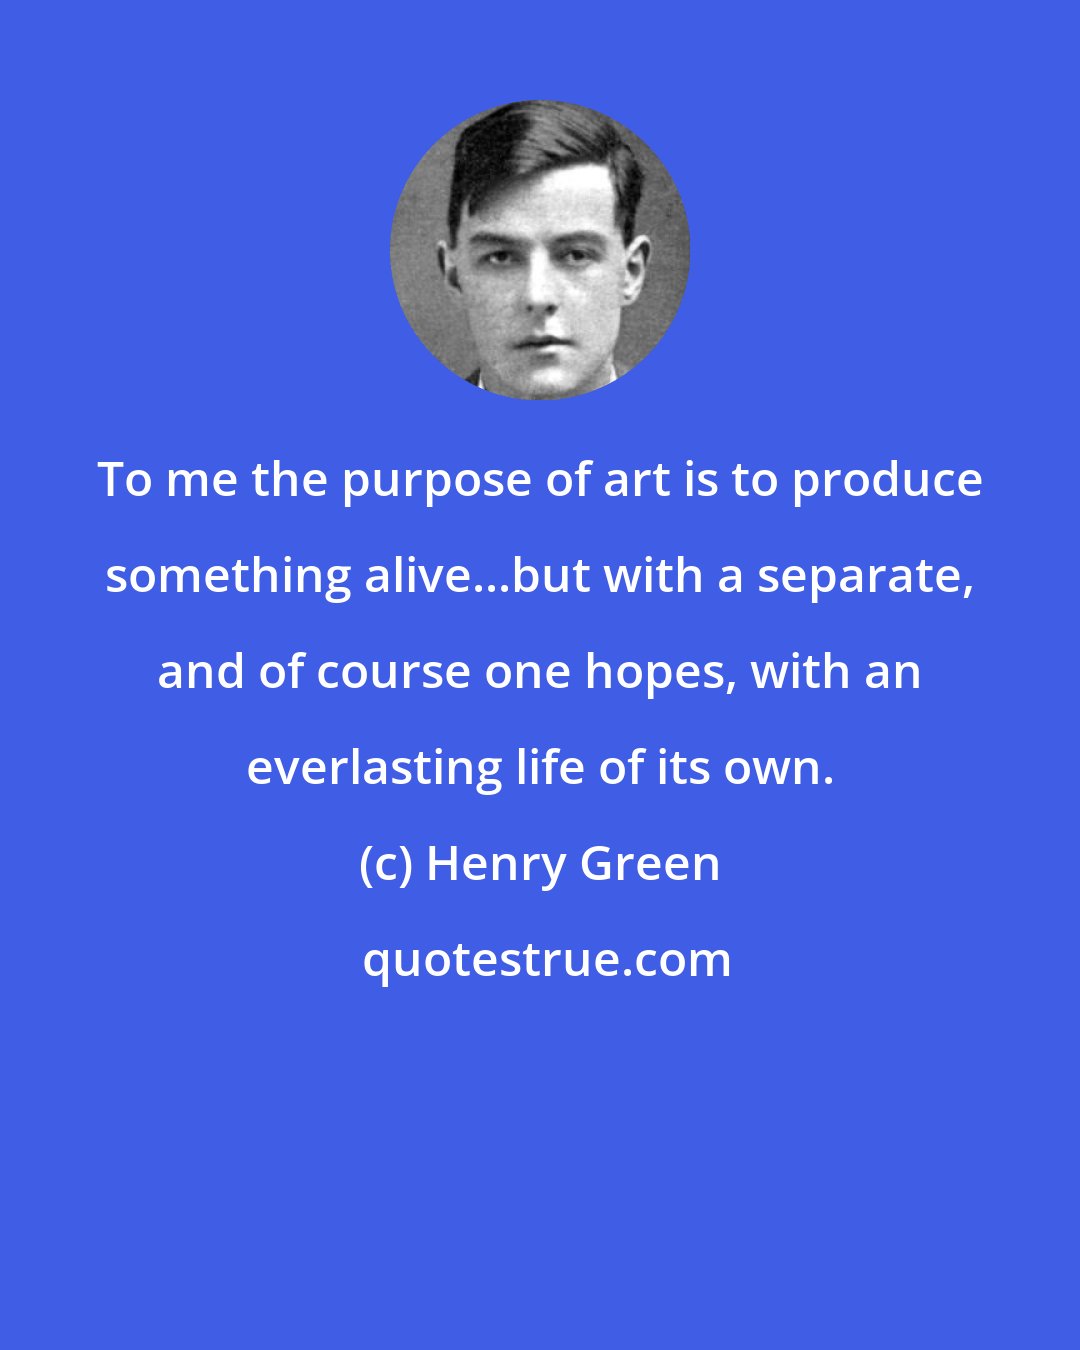 Henry Green: To me the purpose of art is to produce something alive...but with a separate, and of course one hopes, with an everlasting life of its own.